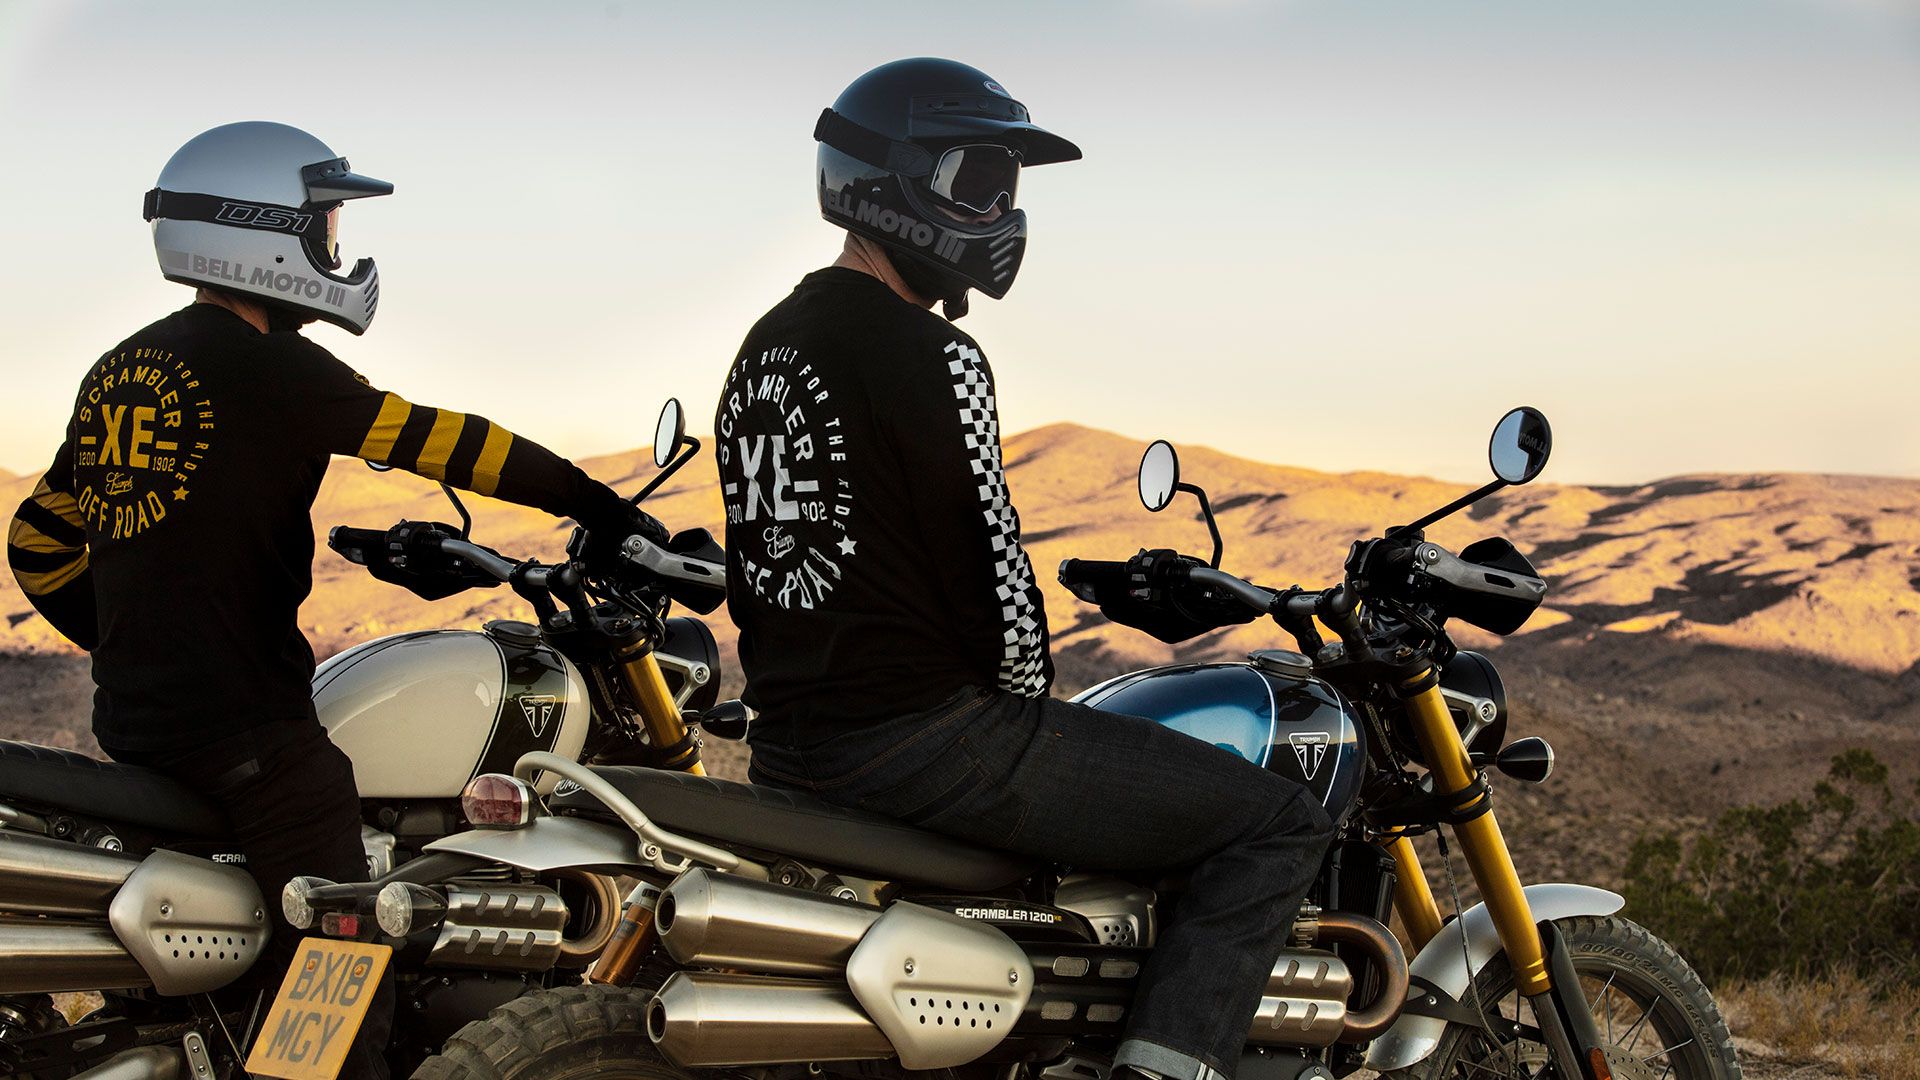 Scrambler 1200 Clothing Collection. For the Ride